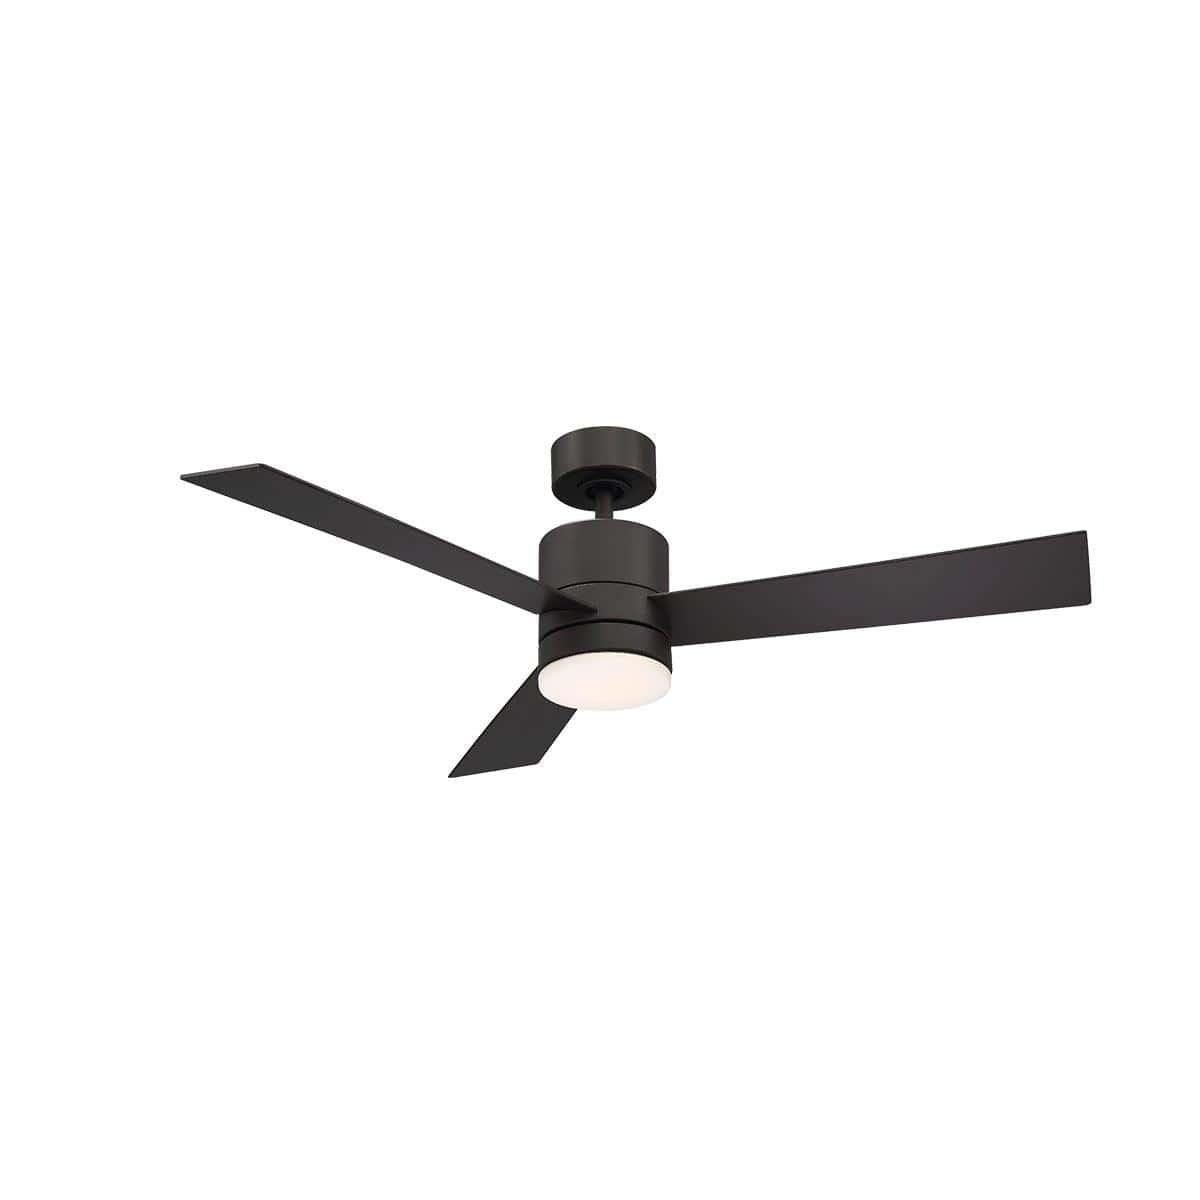 Modern Forms - Axis Ceiling Fan - FR-W1803-52L-27-MB | Montreal Lighting & Hardware